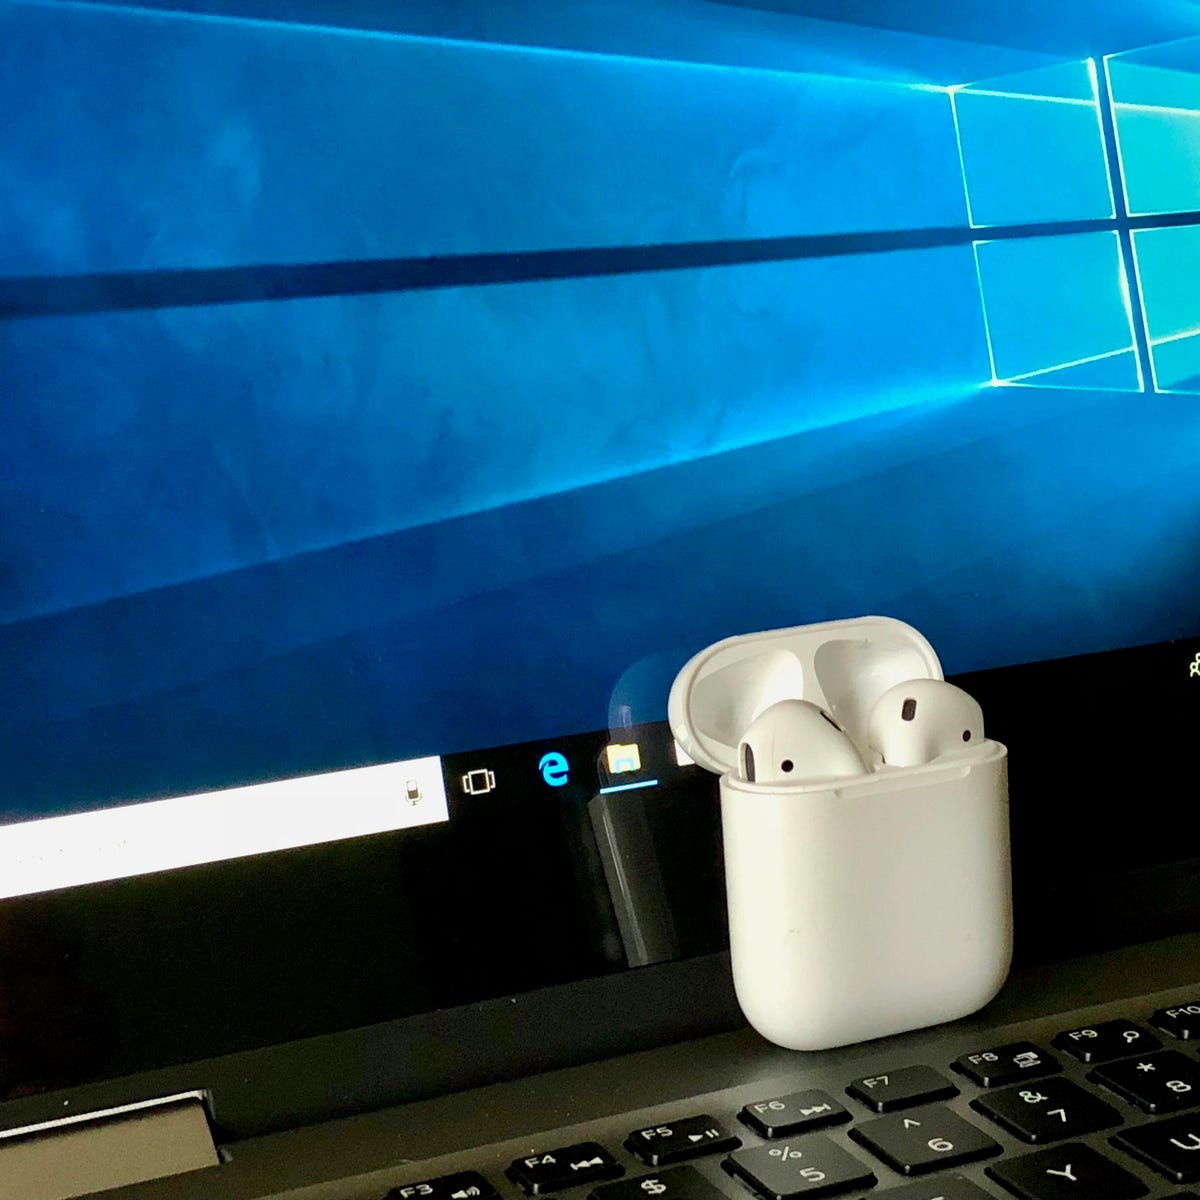 connect airpods to windows